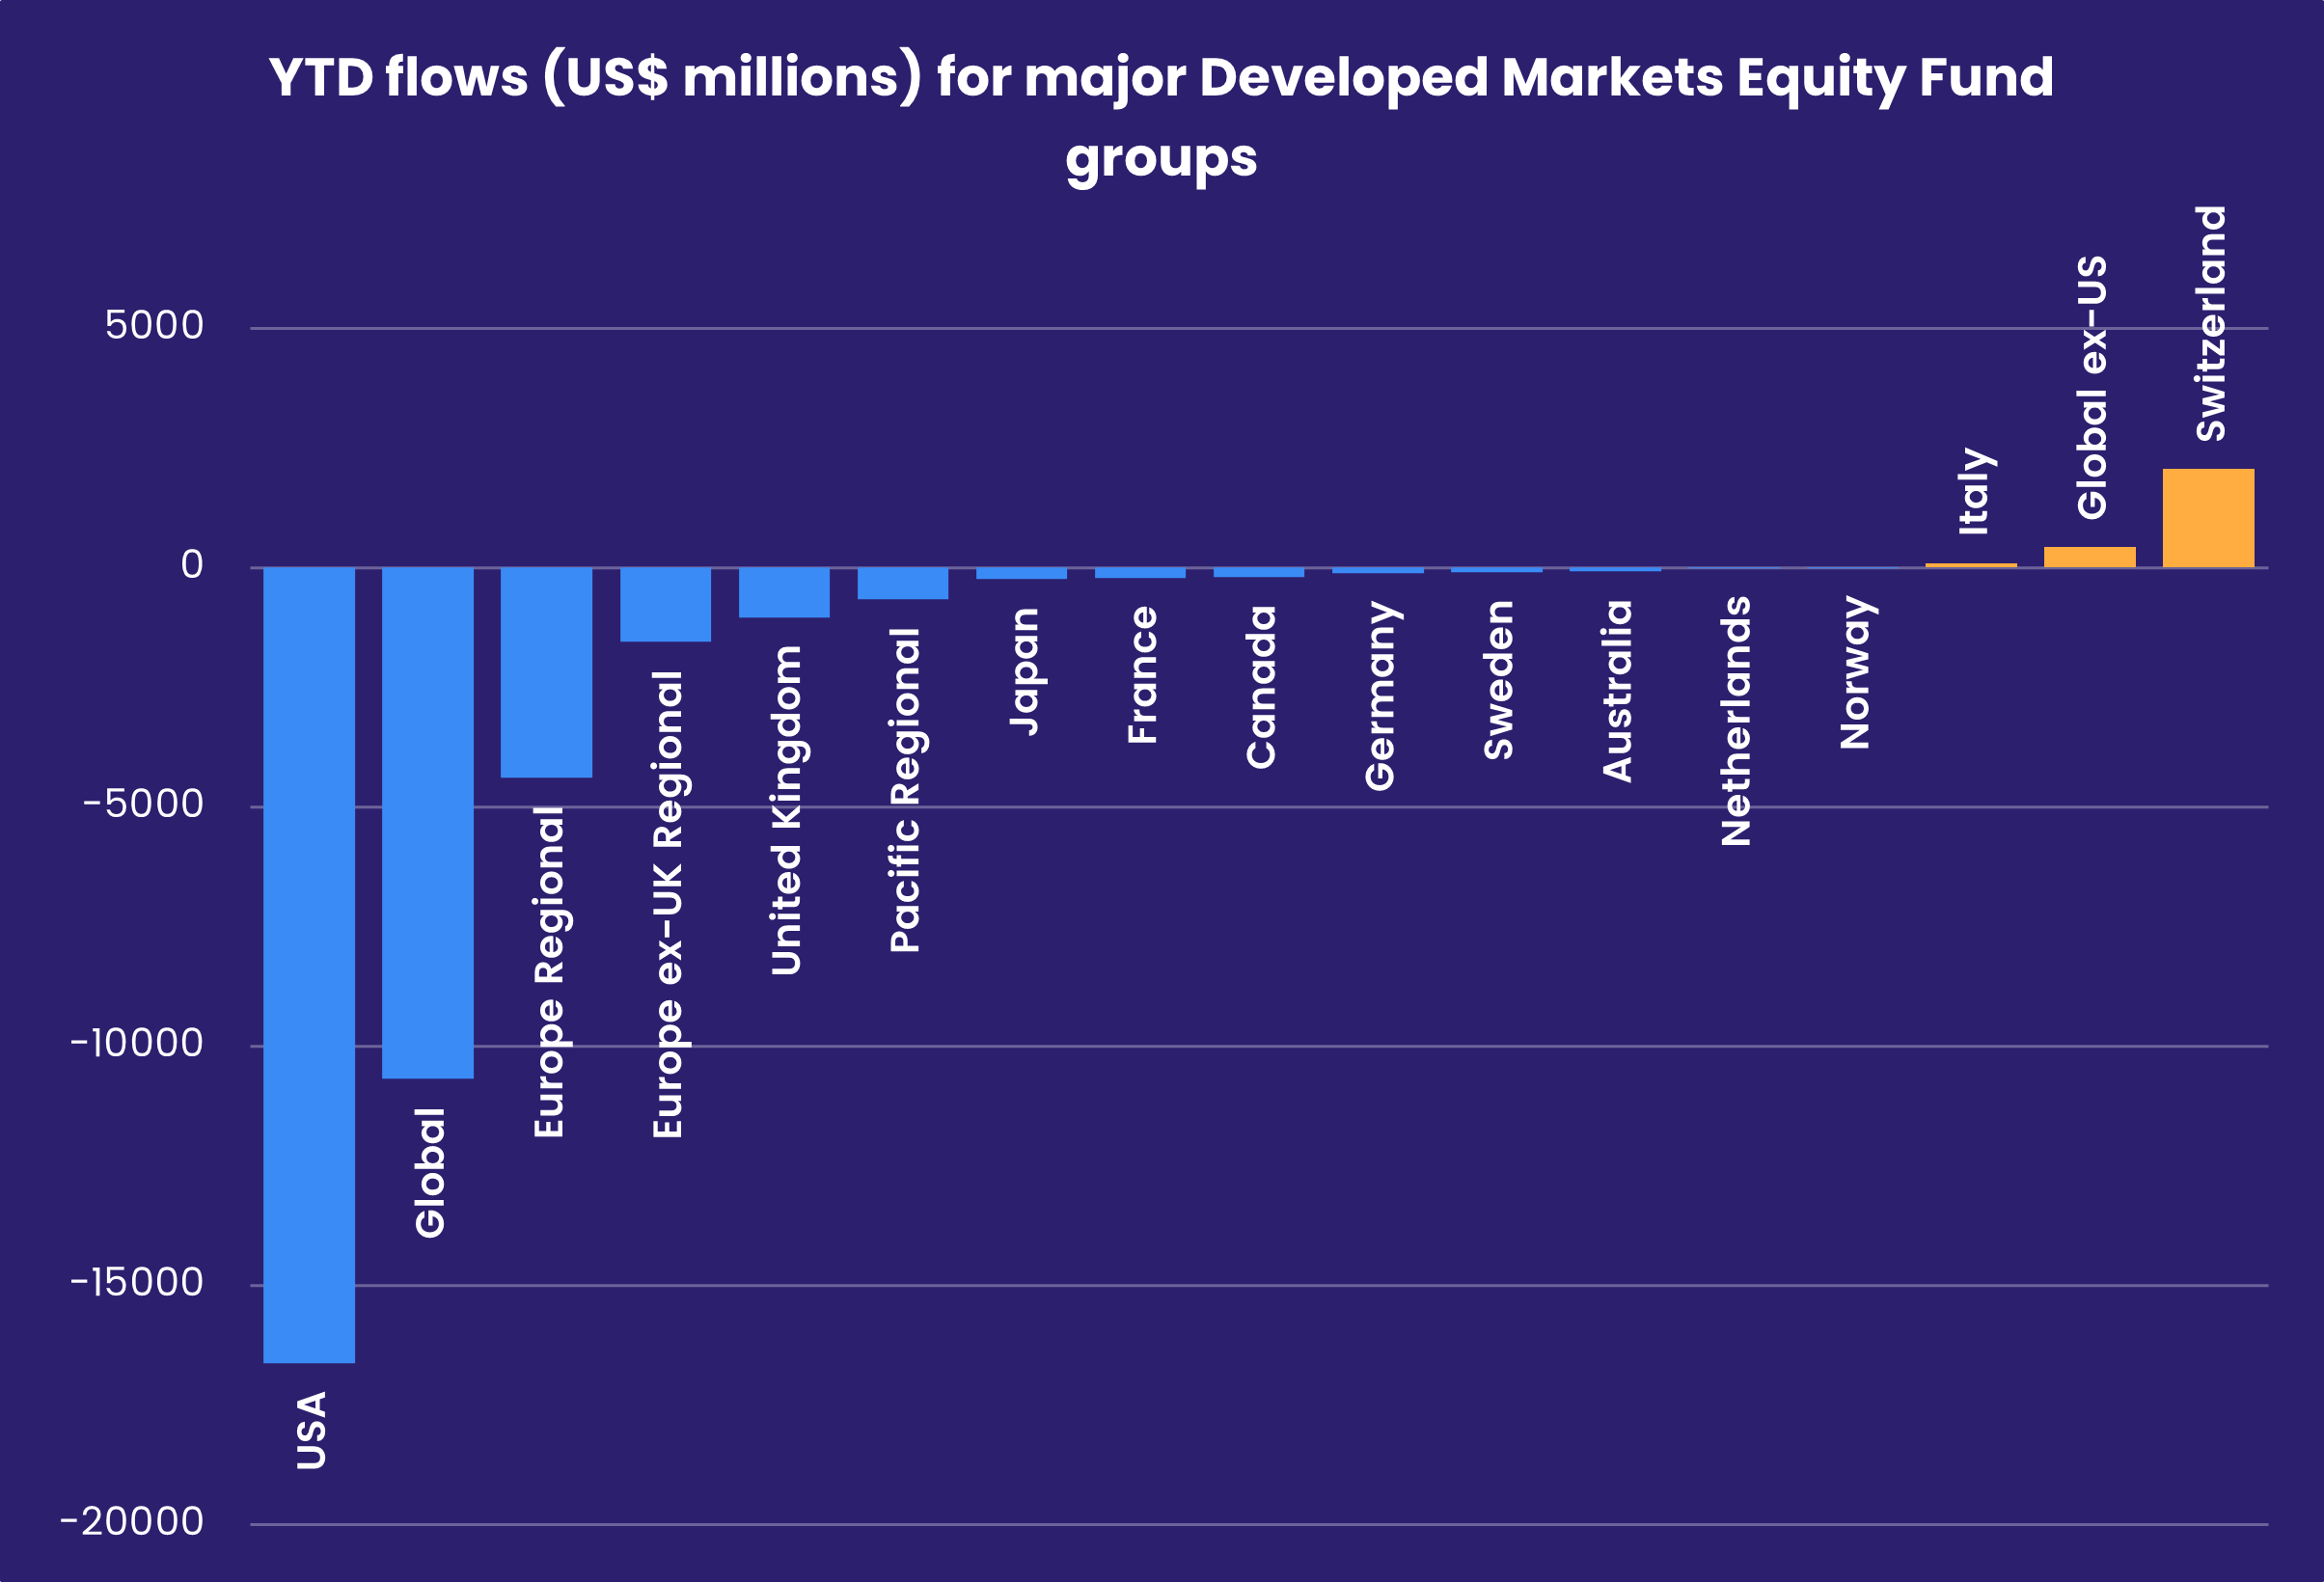 Chart representing 'YTD flows (US$ millions) for major Developed Markets Equity Fund groups'